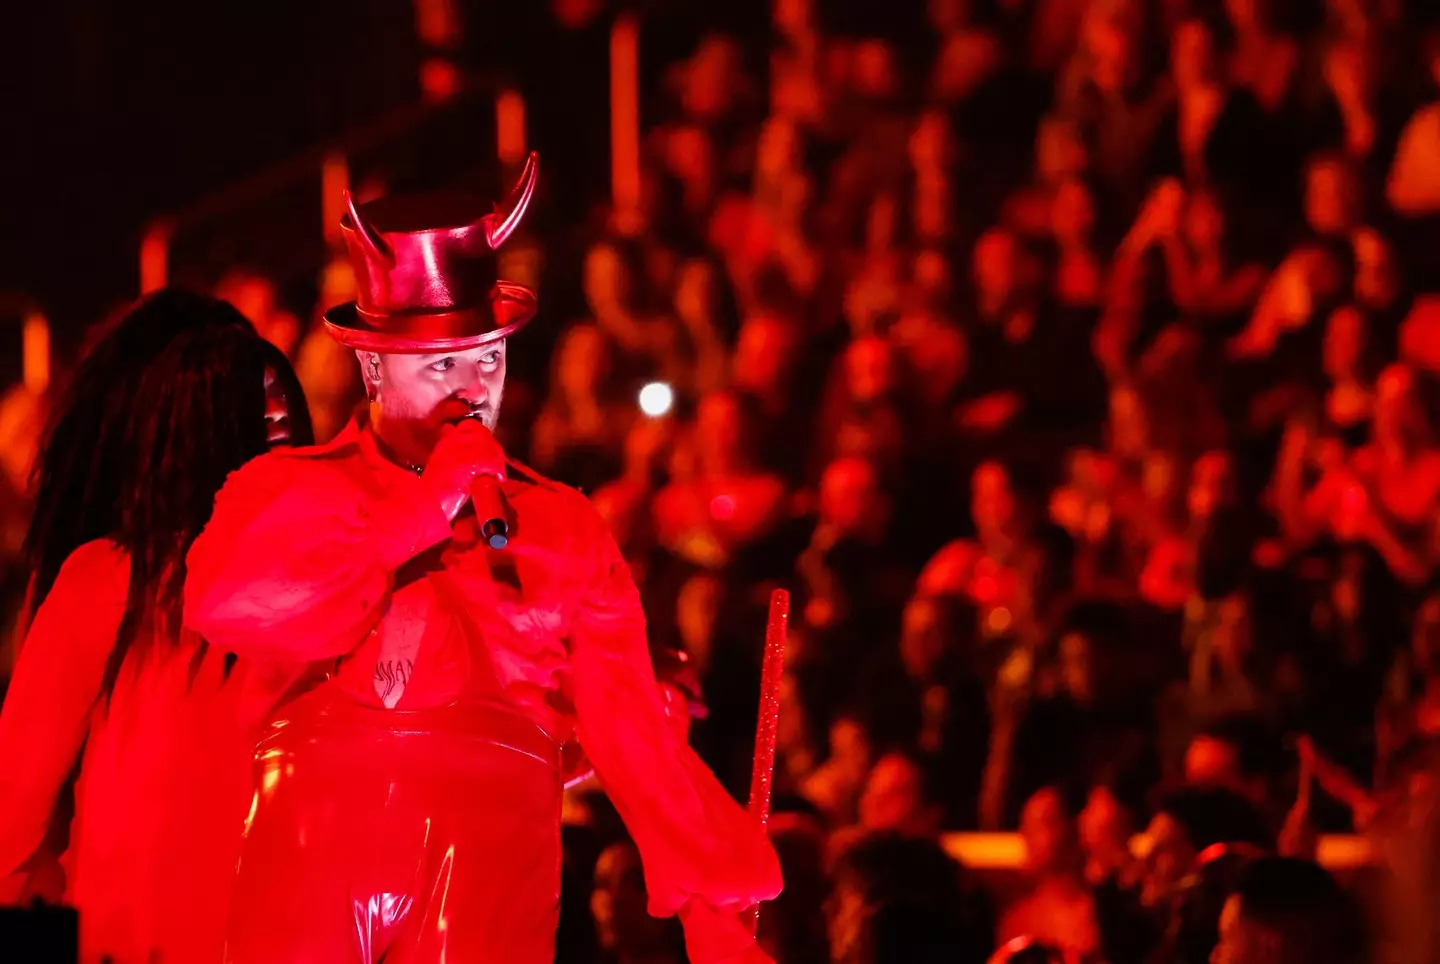 Sam Smith during the performance of 'Unholy' at the Grammys.